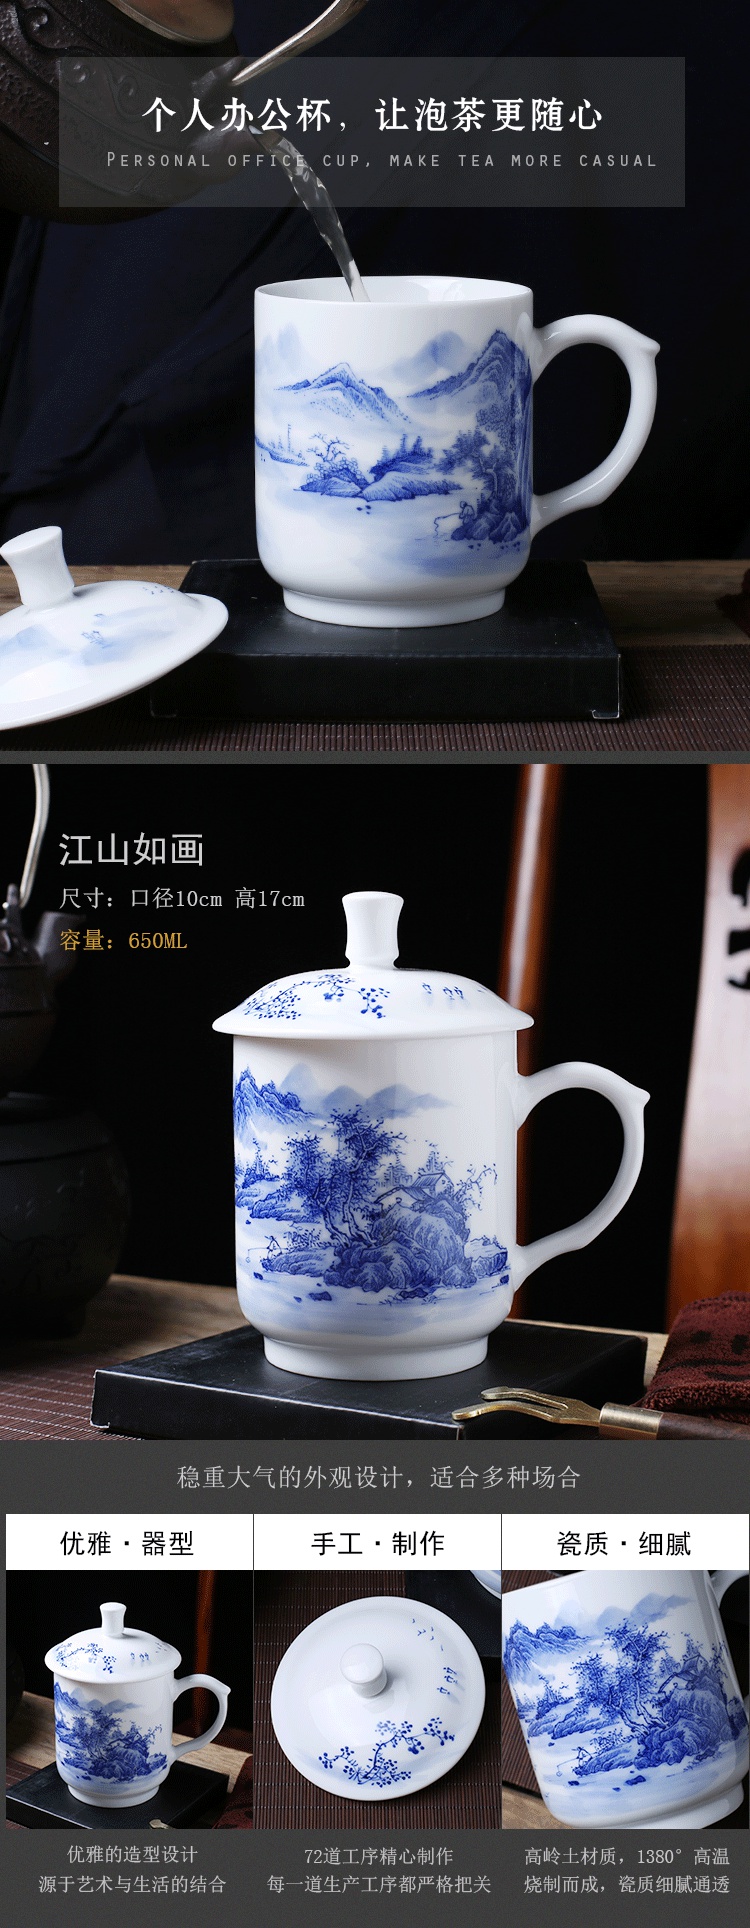 . Poly real jingdezhen hand - made ceramic household business scene large capacity with the cover of blue and white porcelain cup single office mercifully